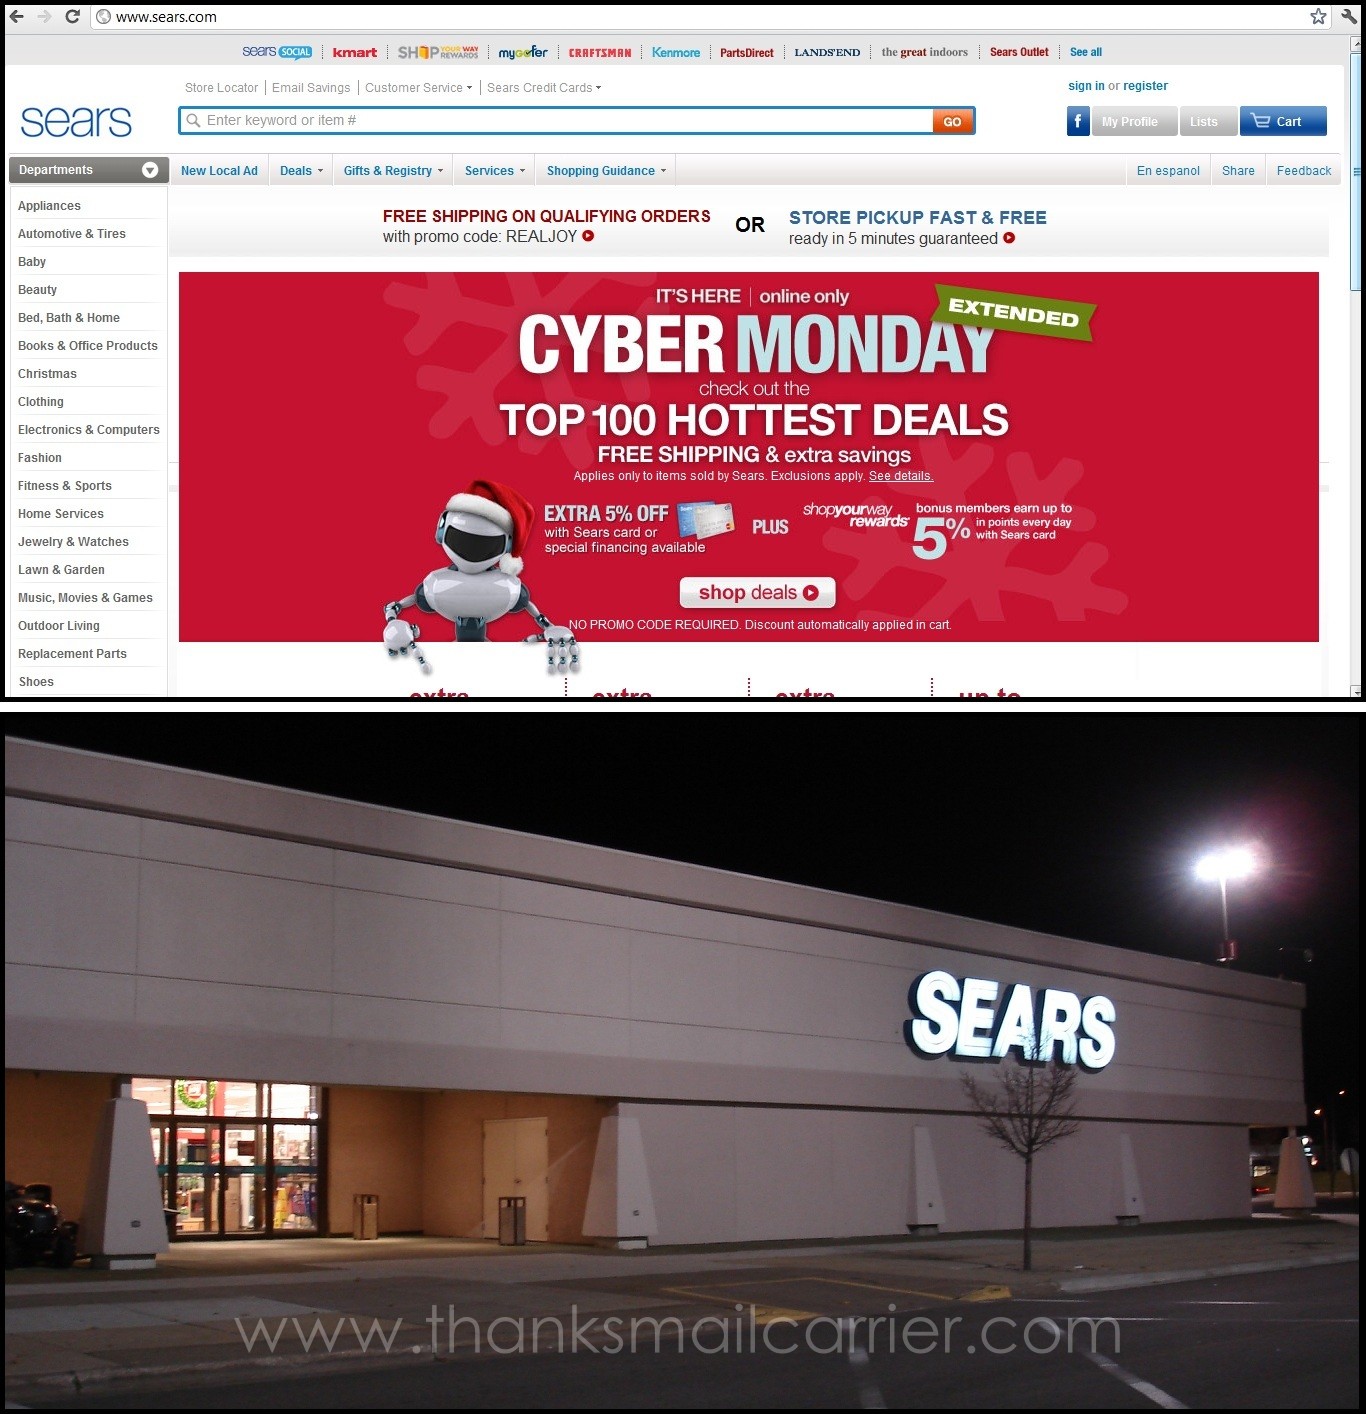 Thanks, Mail Carrier | Taking the Sears Holiday Shopping Challenge